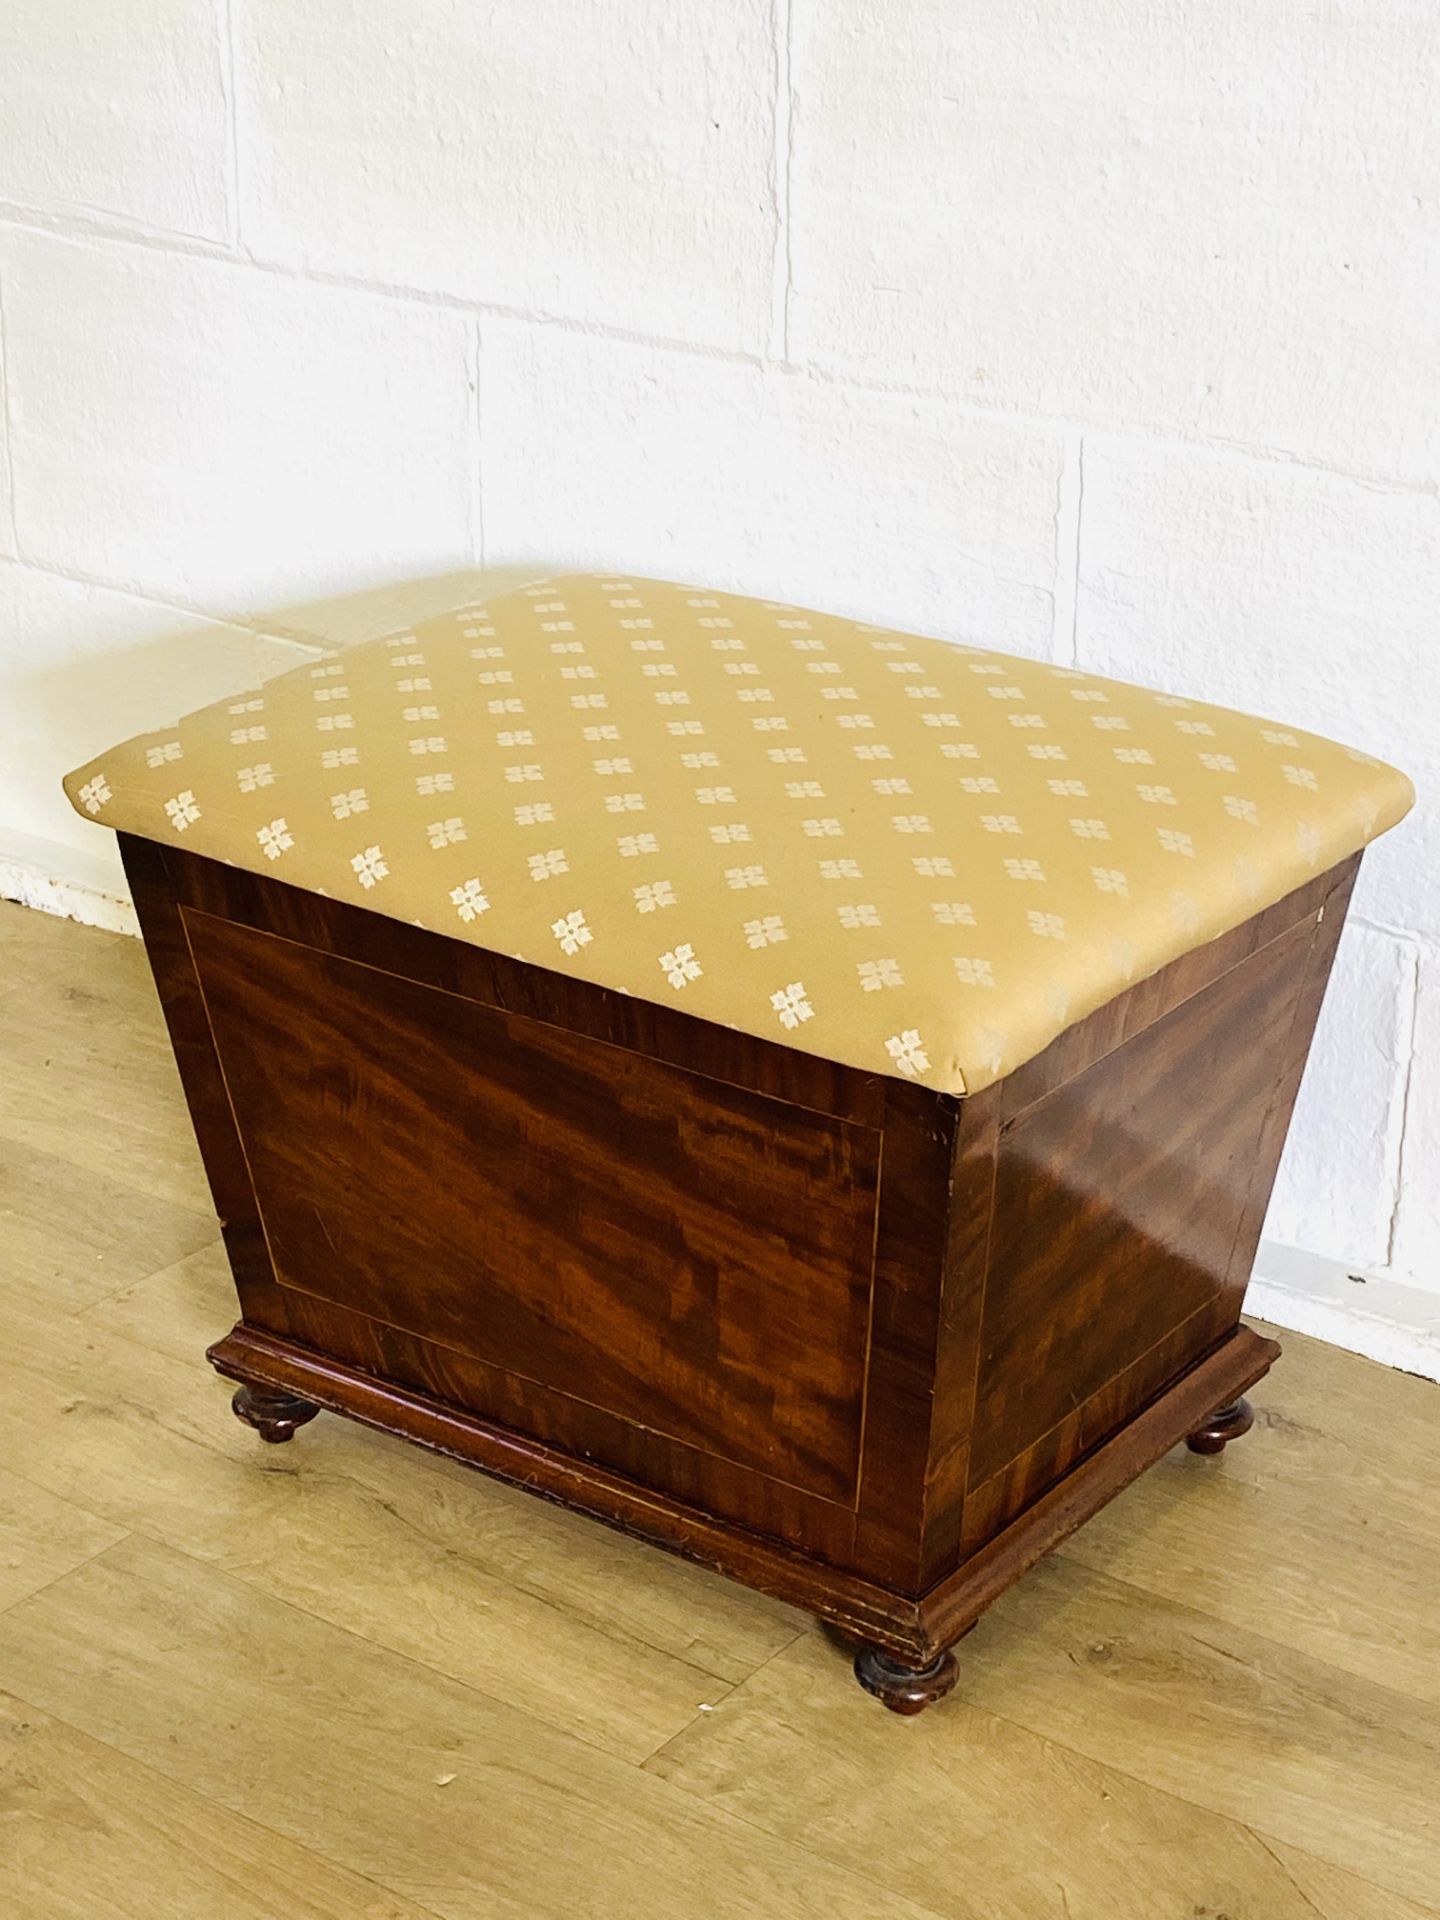 Victorian ottoman with padded seat - Image 3 of 6